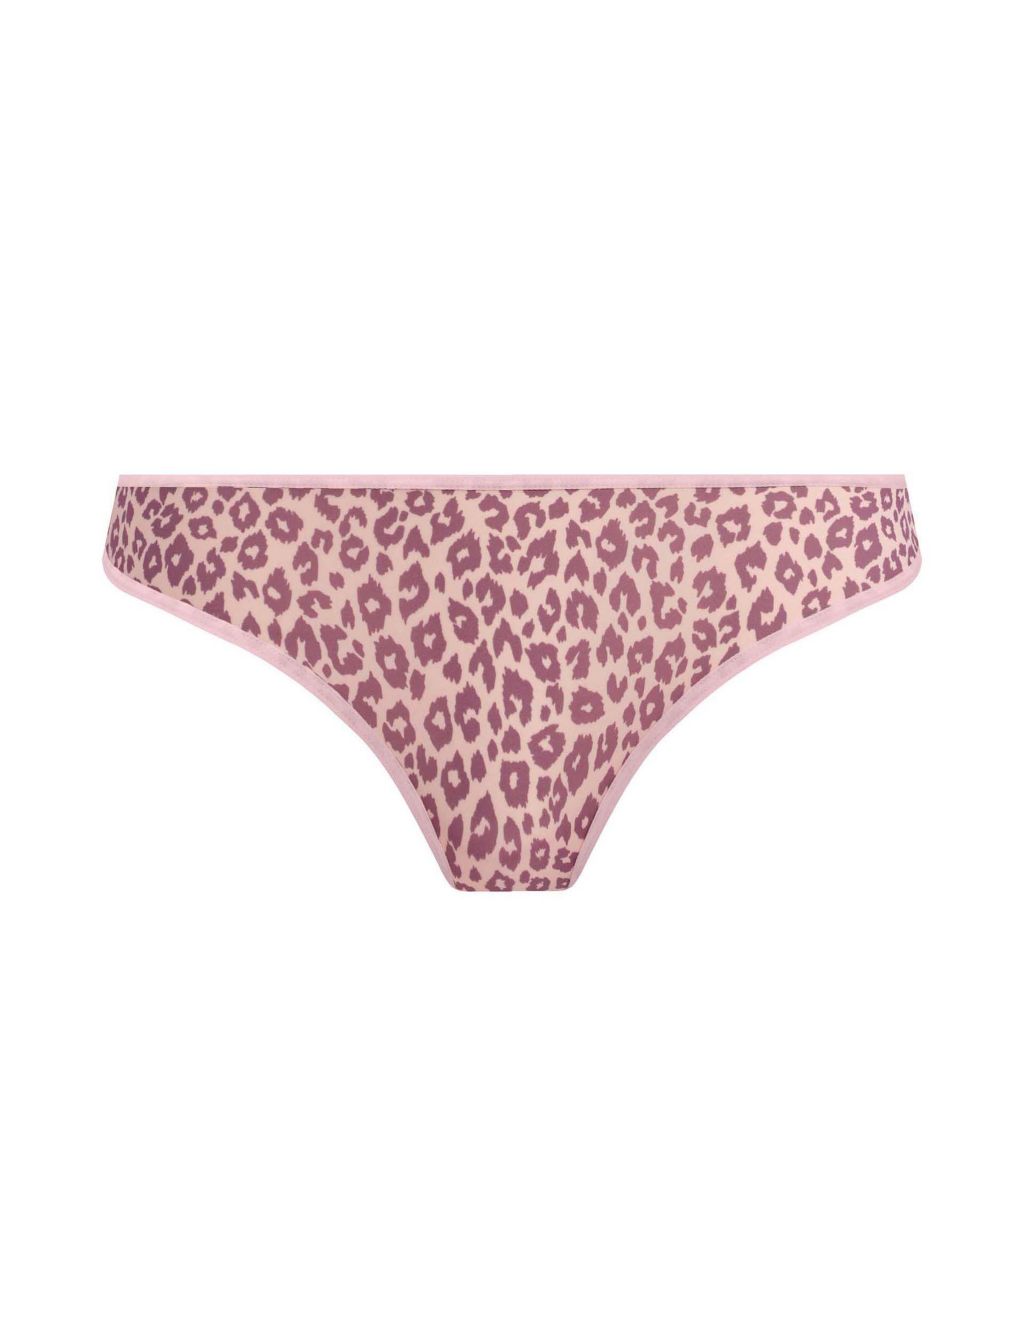 Undetected Leopard Print Brazilian Knickers 1 of 6